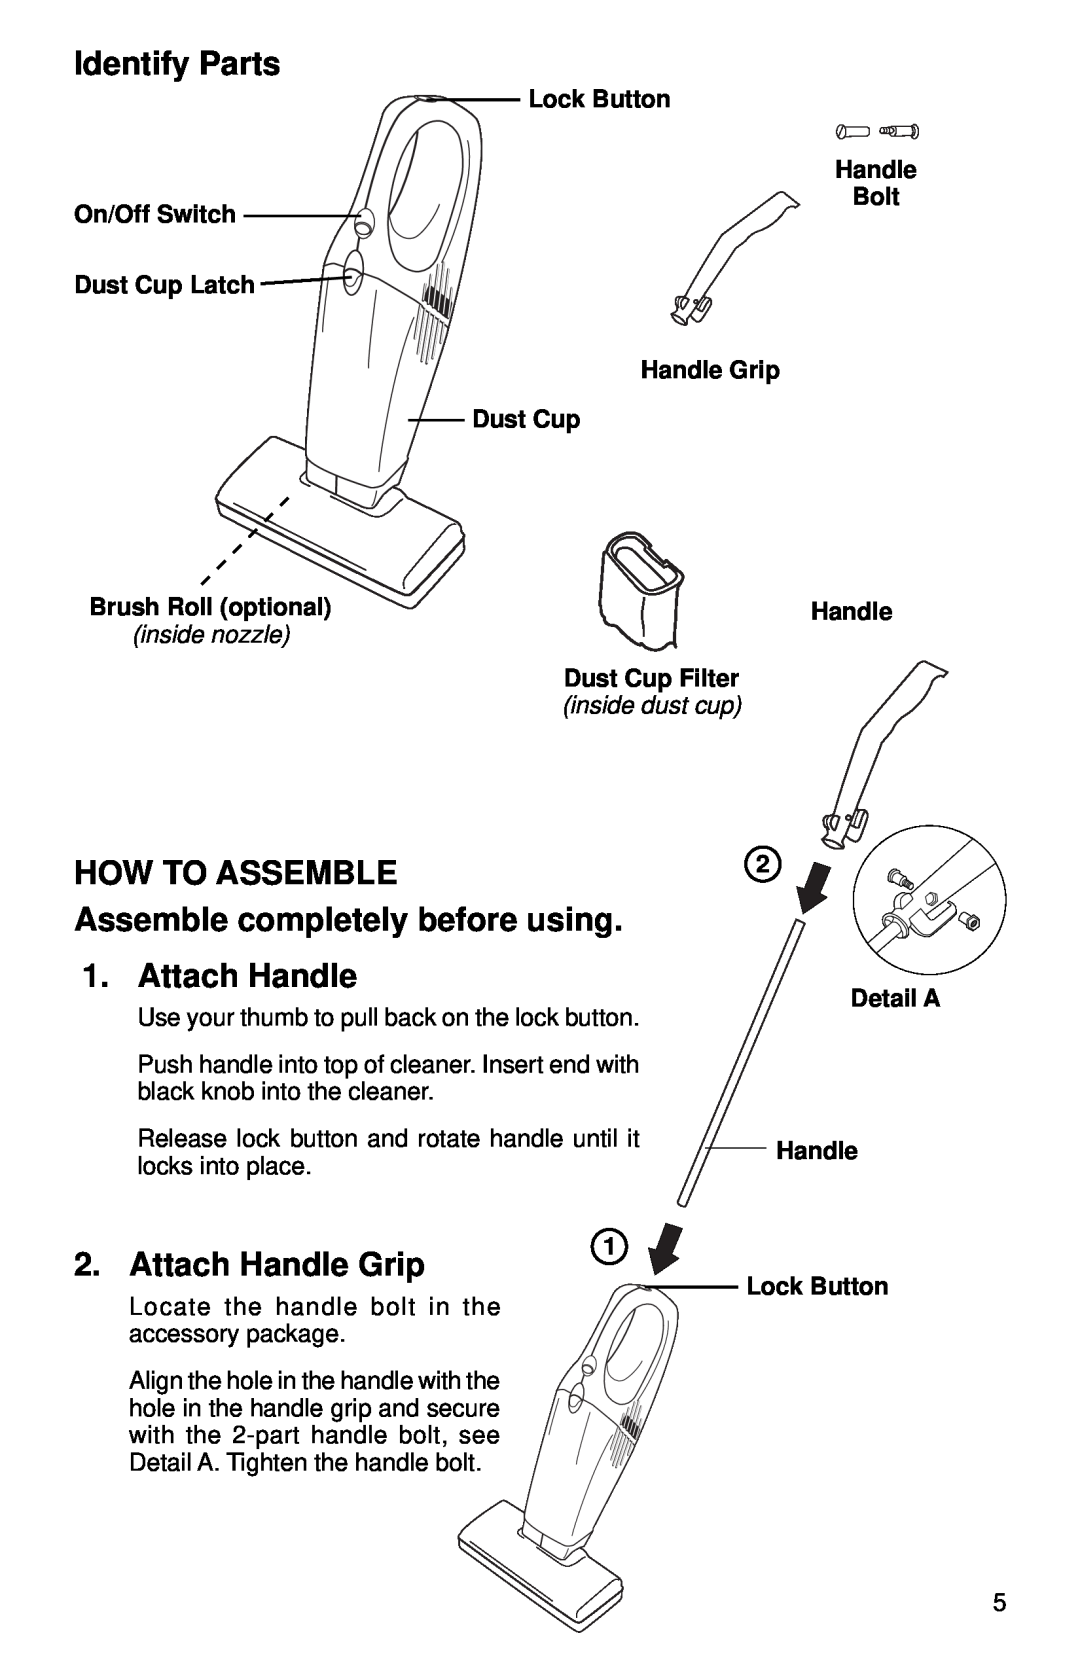 Eureka 160 Series Identify Parts, HOW TO ASSEMBLE Assemble completely before using 1. Attach Handle, Attach Handle Grip 